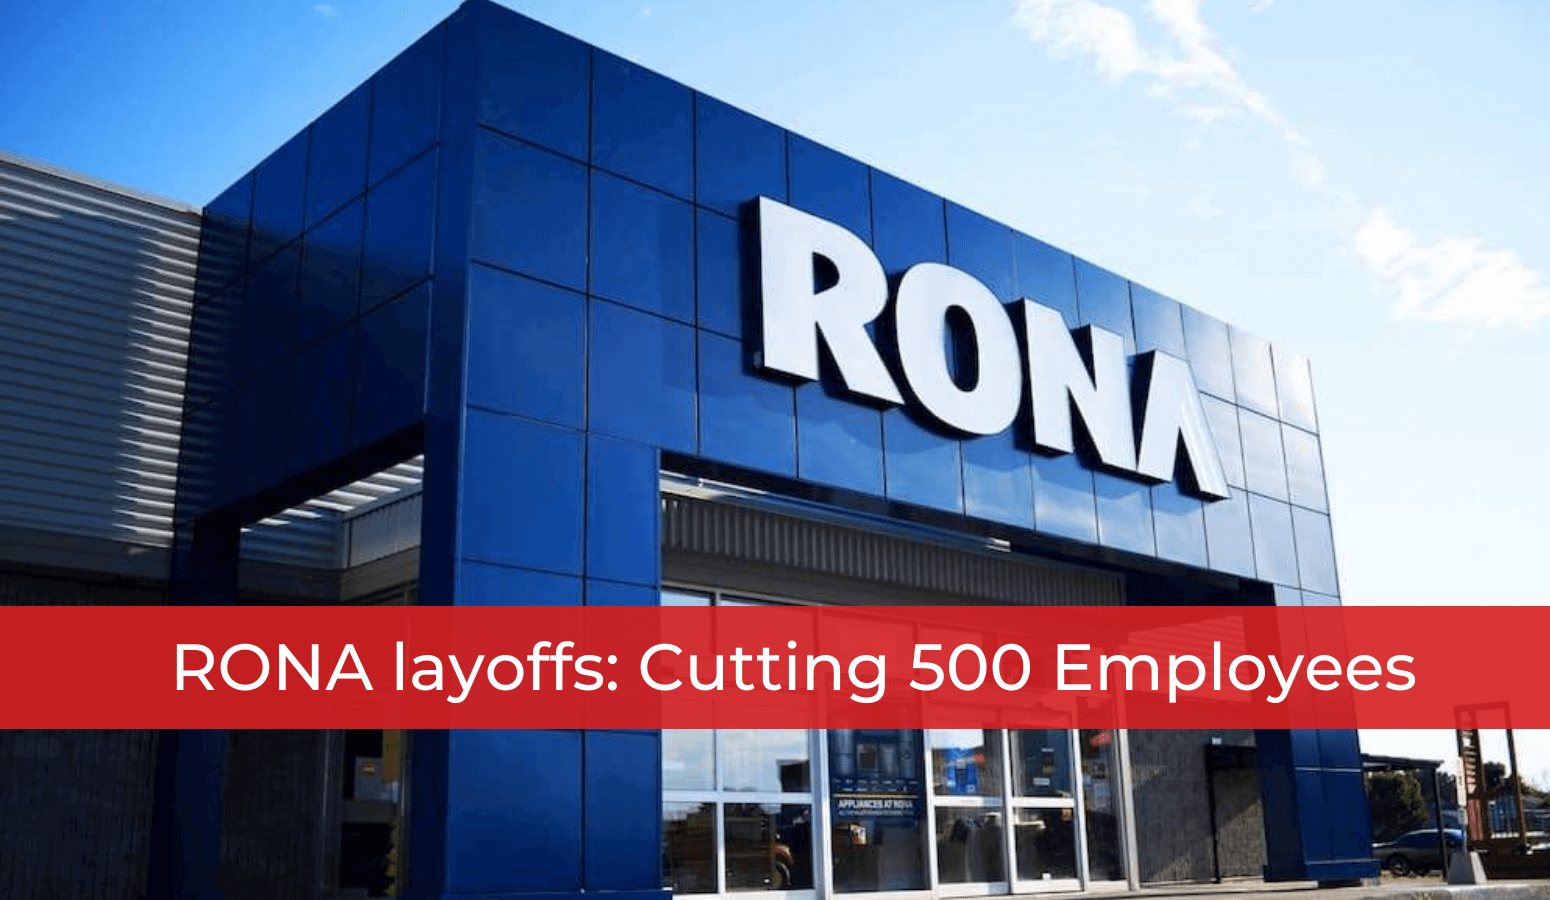 Featured image for “RONA layoffs: Cutting 500 Employees”